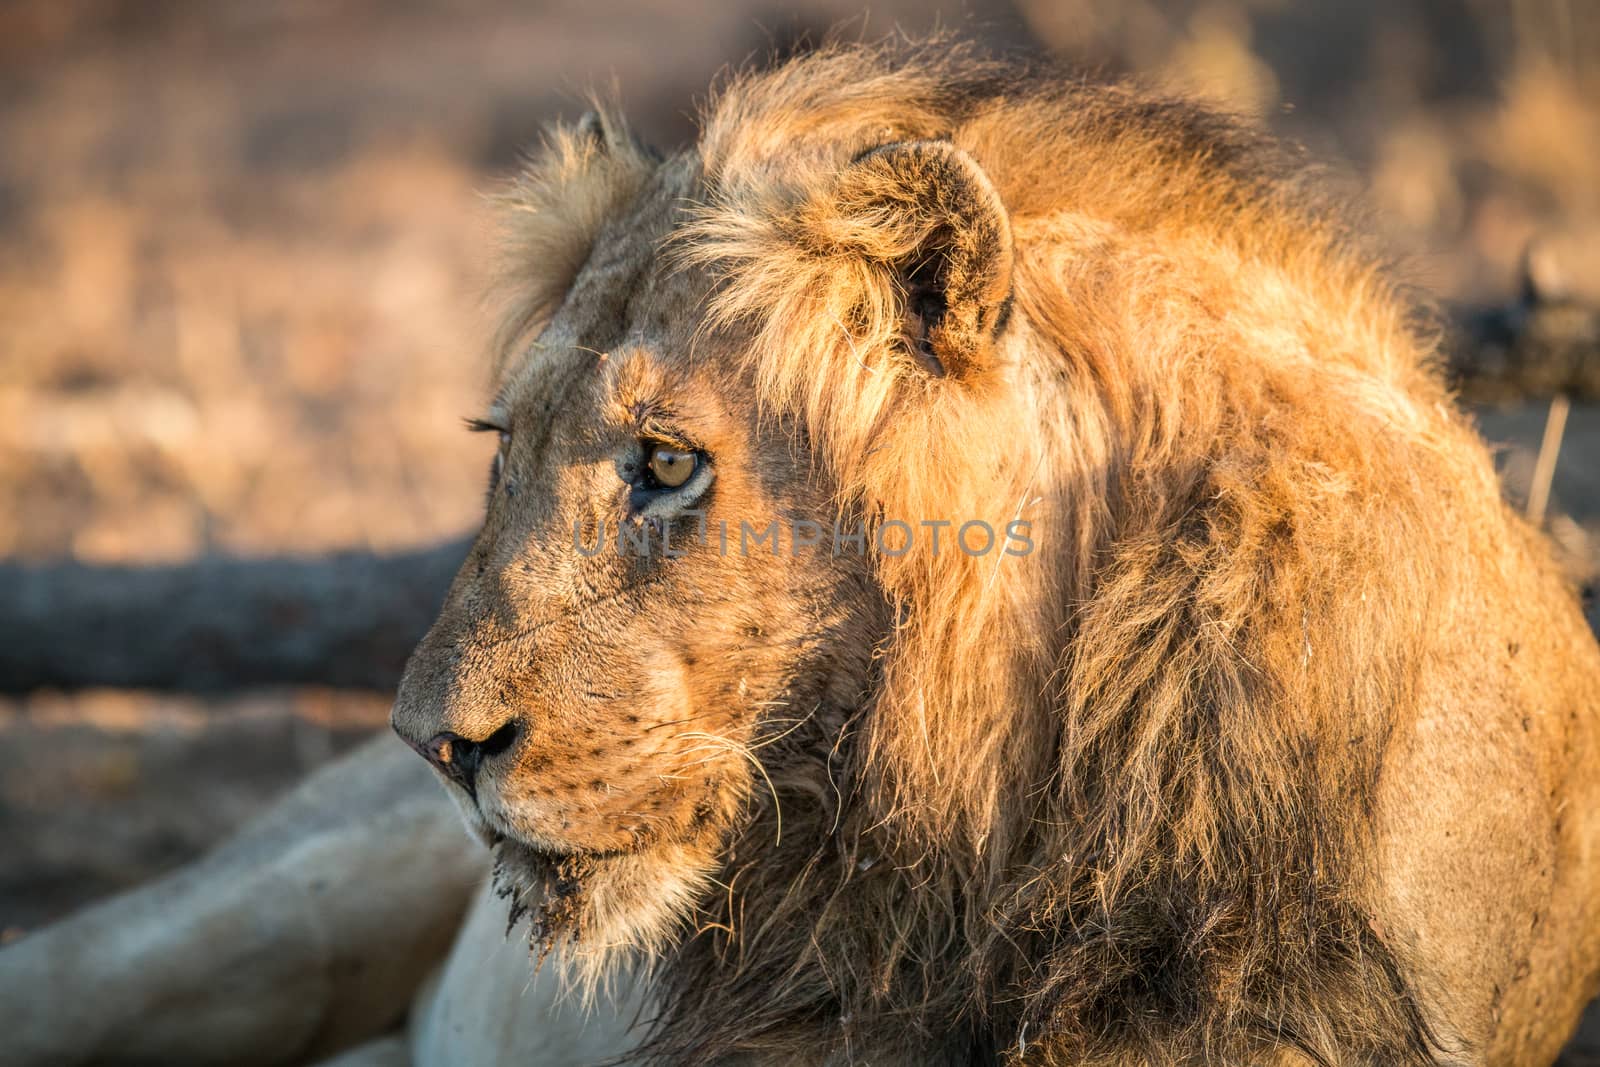 Side profile of a male Lion in the Kruger National Park, South Africa.